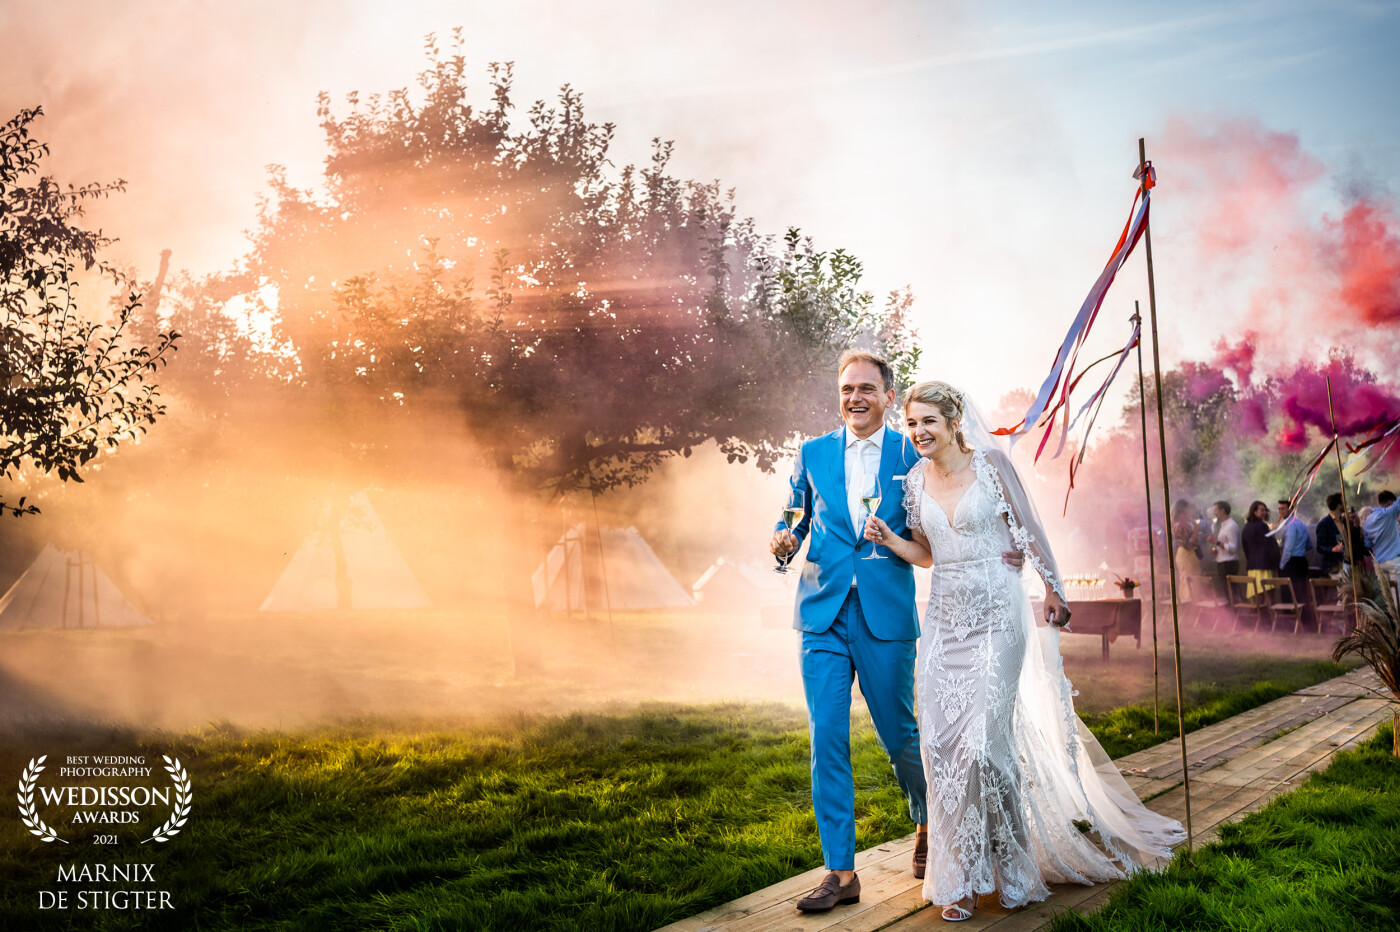 The ceremony of this festival styled wedding ended with the guests lighting flare while the wedding couple walked off. The low sunlight and the wind in the right direction created a perfect background to capture this moment.